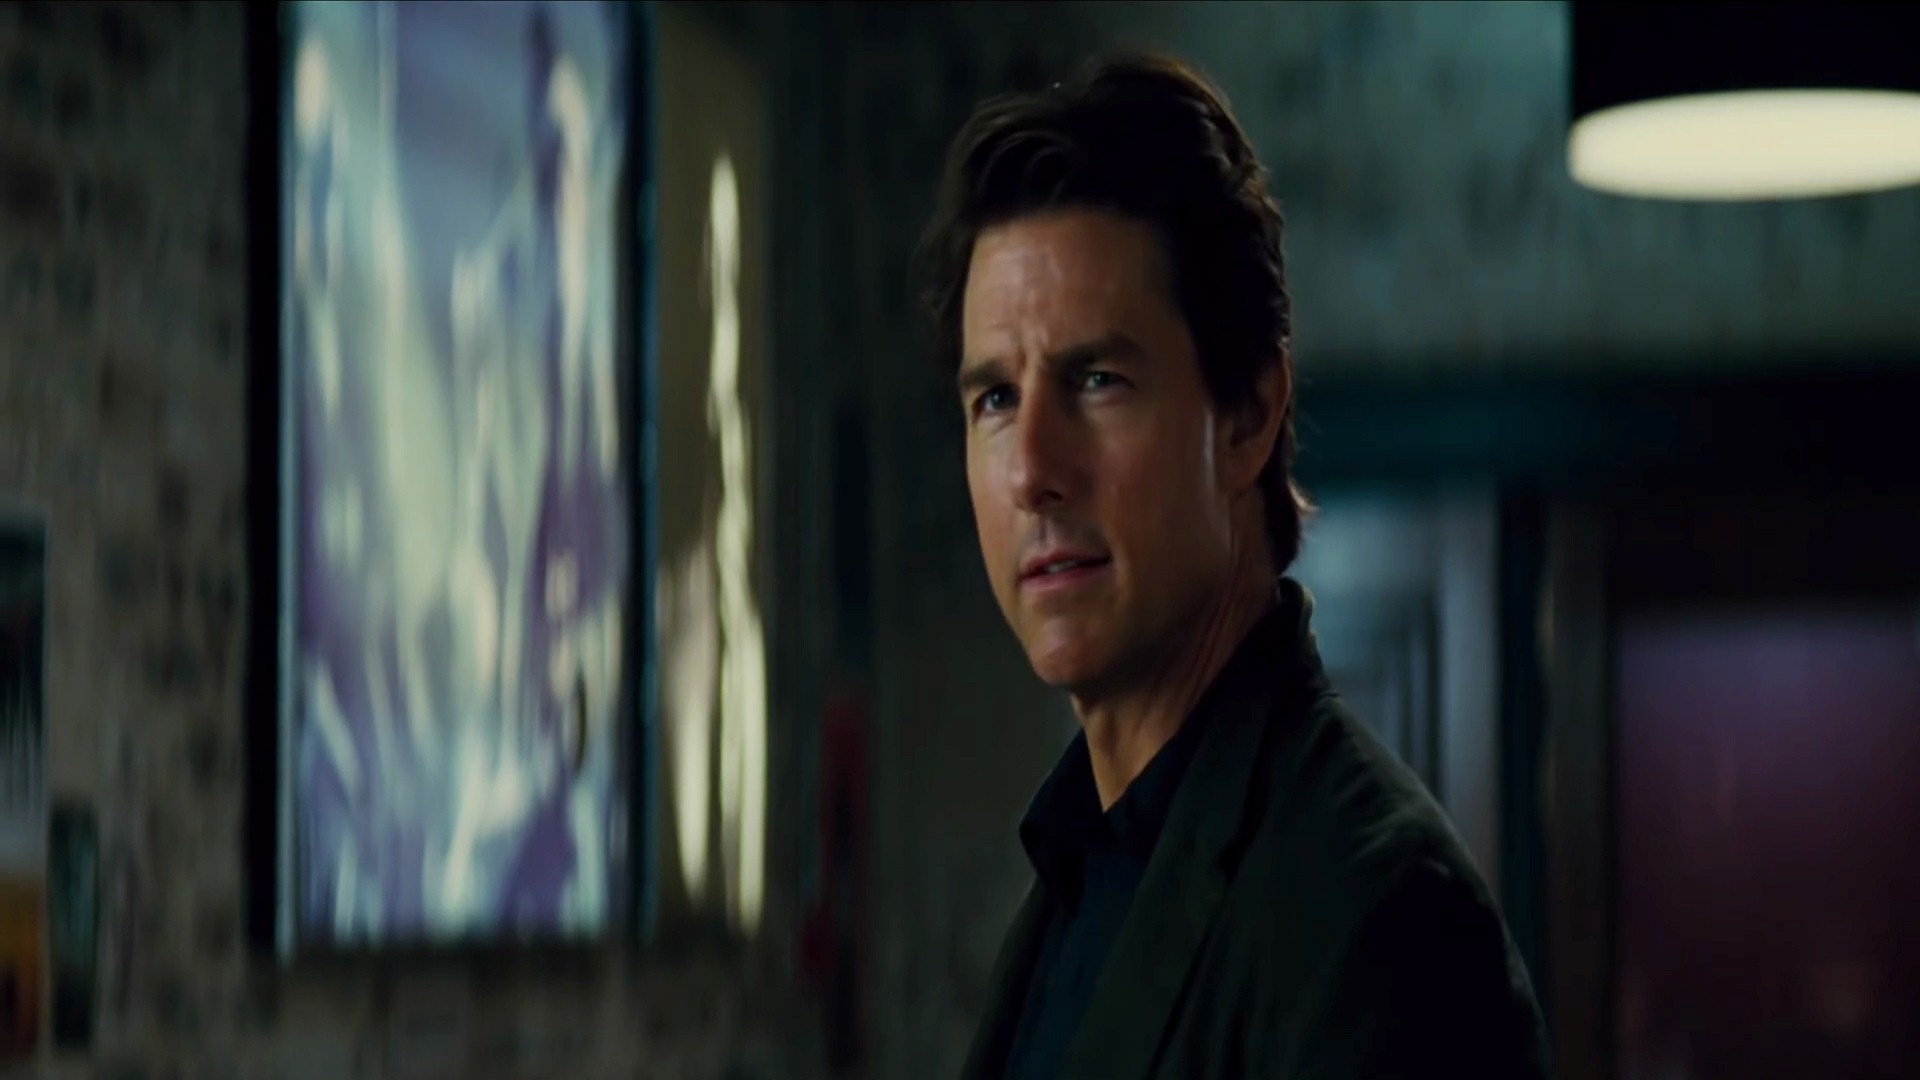 1920x1080 Hollywood Film Actor Tom Cruise in Mission Impossible 5 Movie Photo